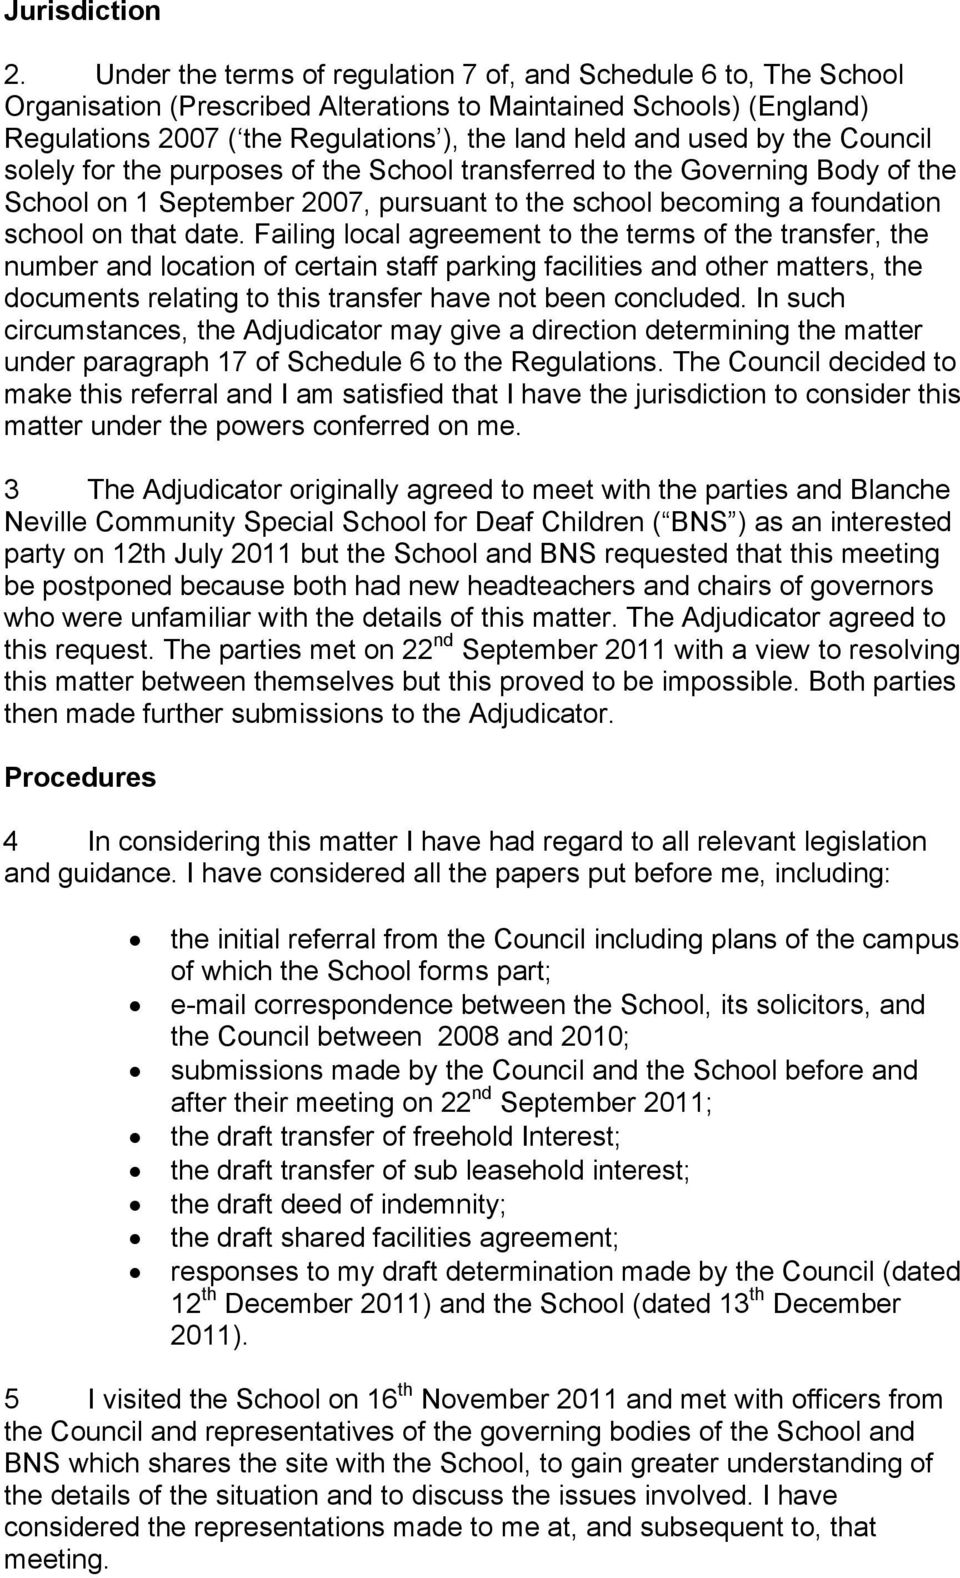 the Council solely for the purposes of the School transferred to the Governing Body of the School on 1 September 2007, pursuant to the school becoming a foundation school on that date.